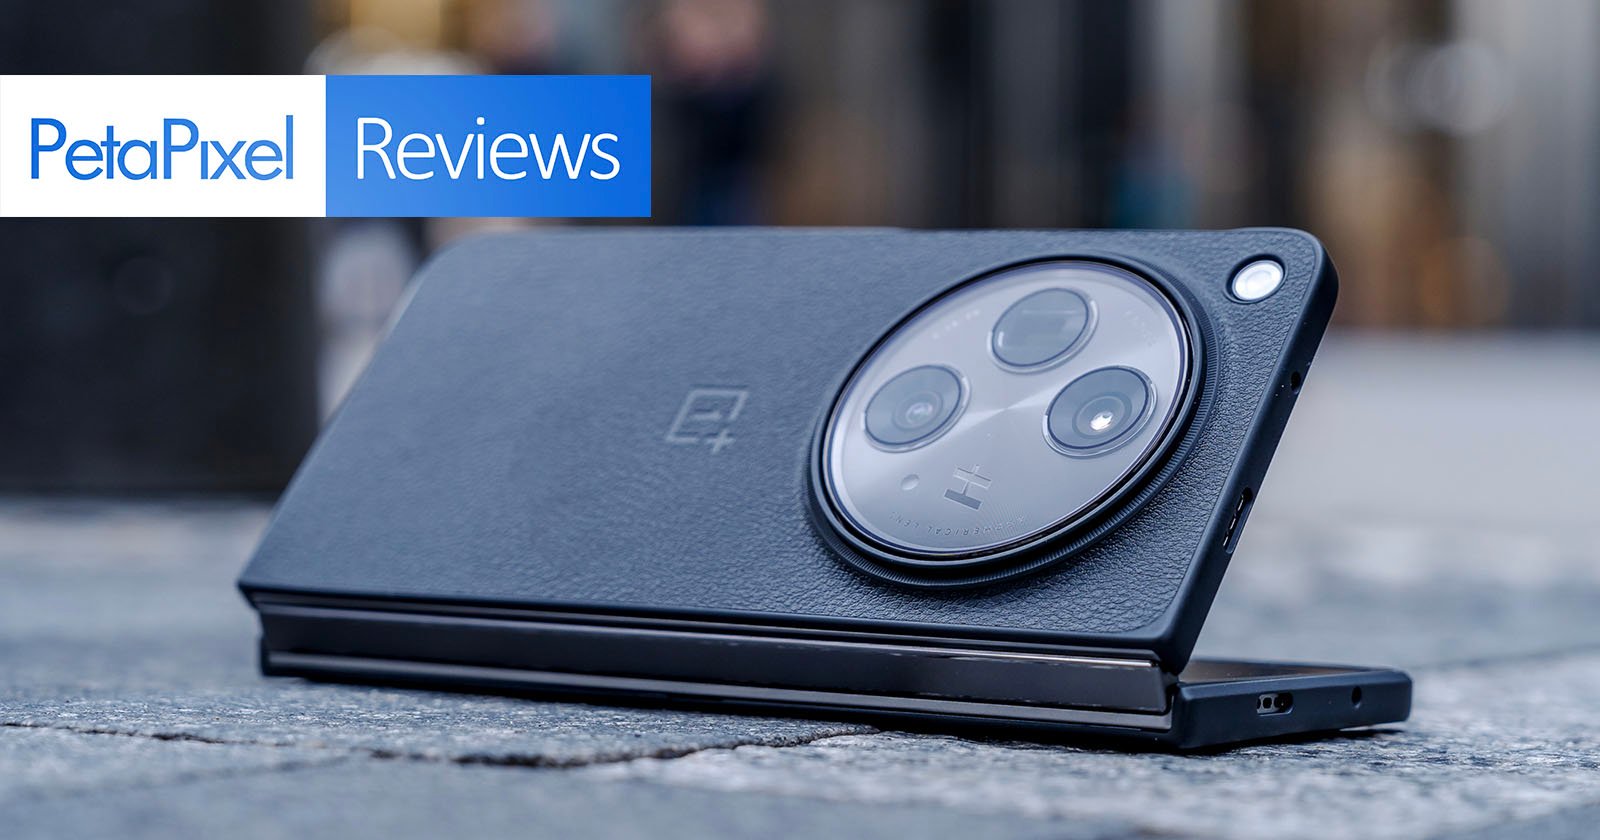  oneplus open review skimping cameras here 